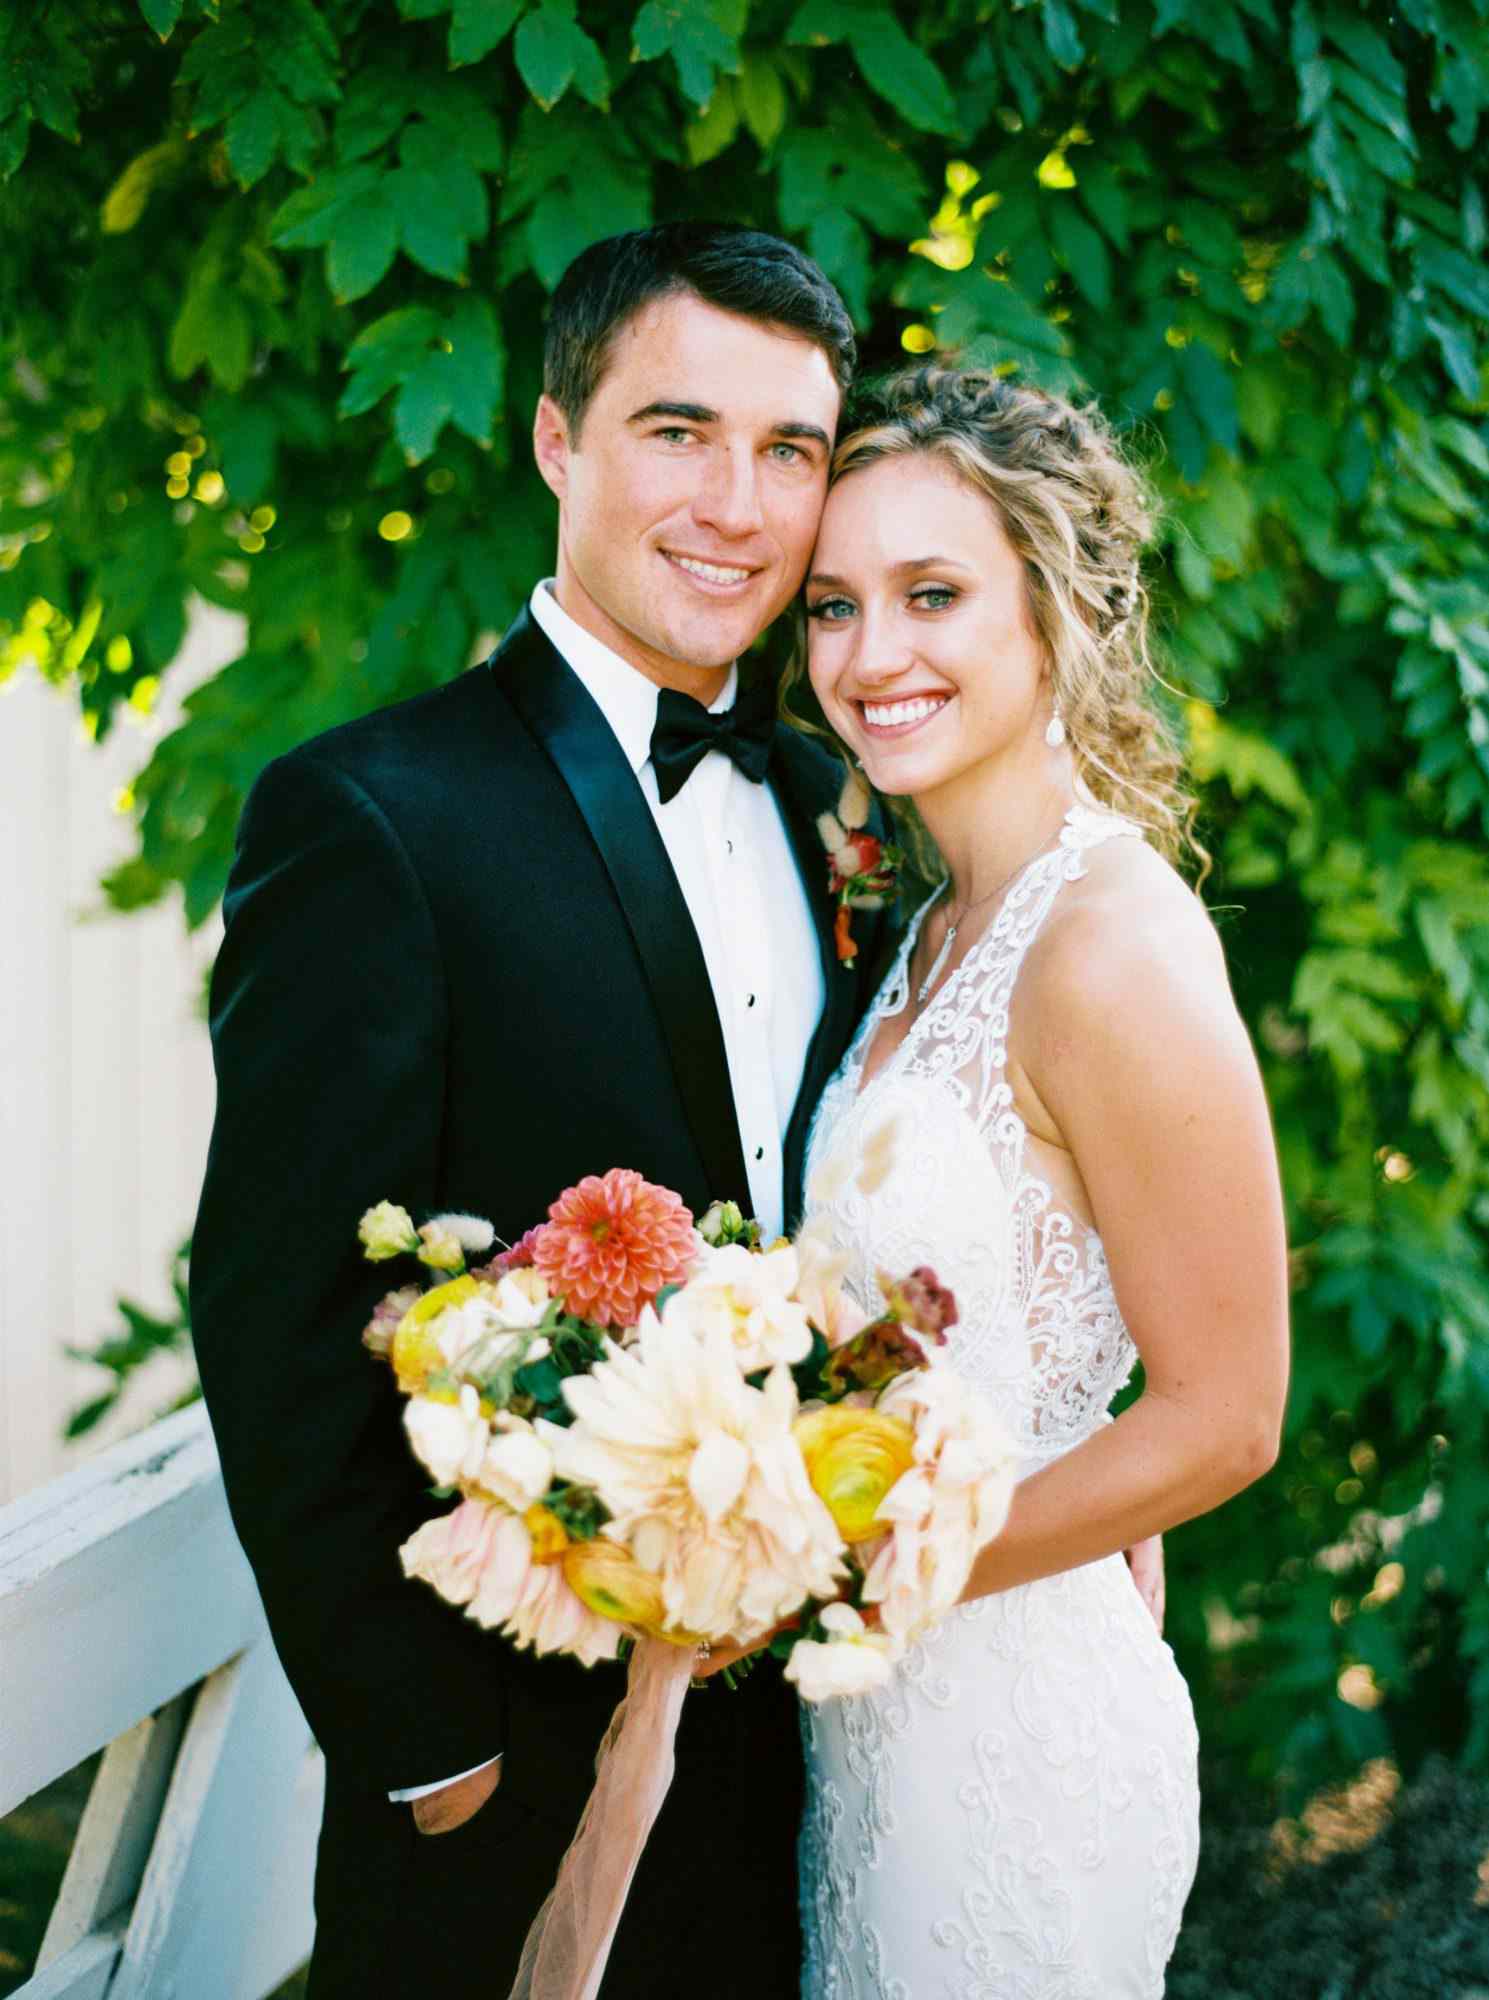 bride and groom pose in wedding attire outdoors